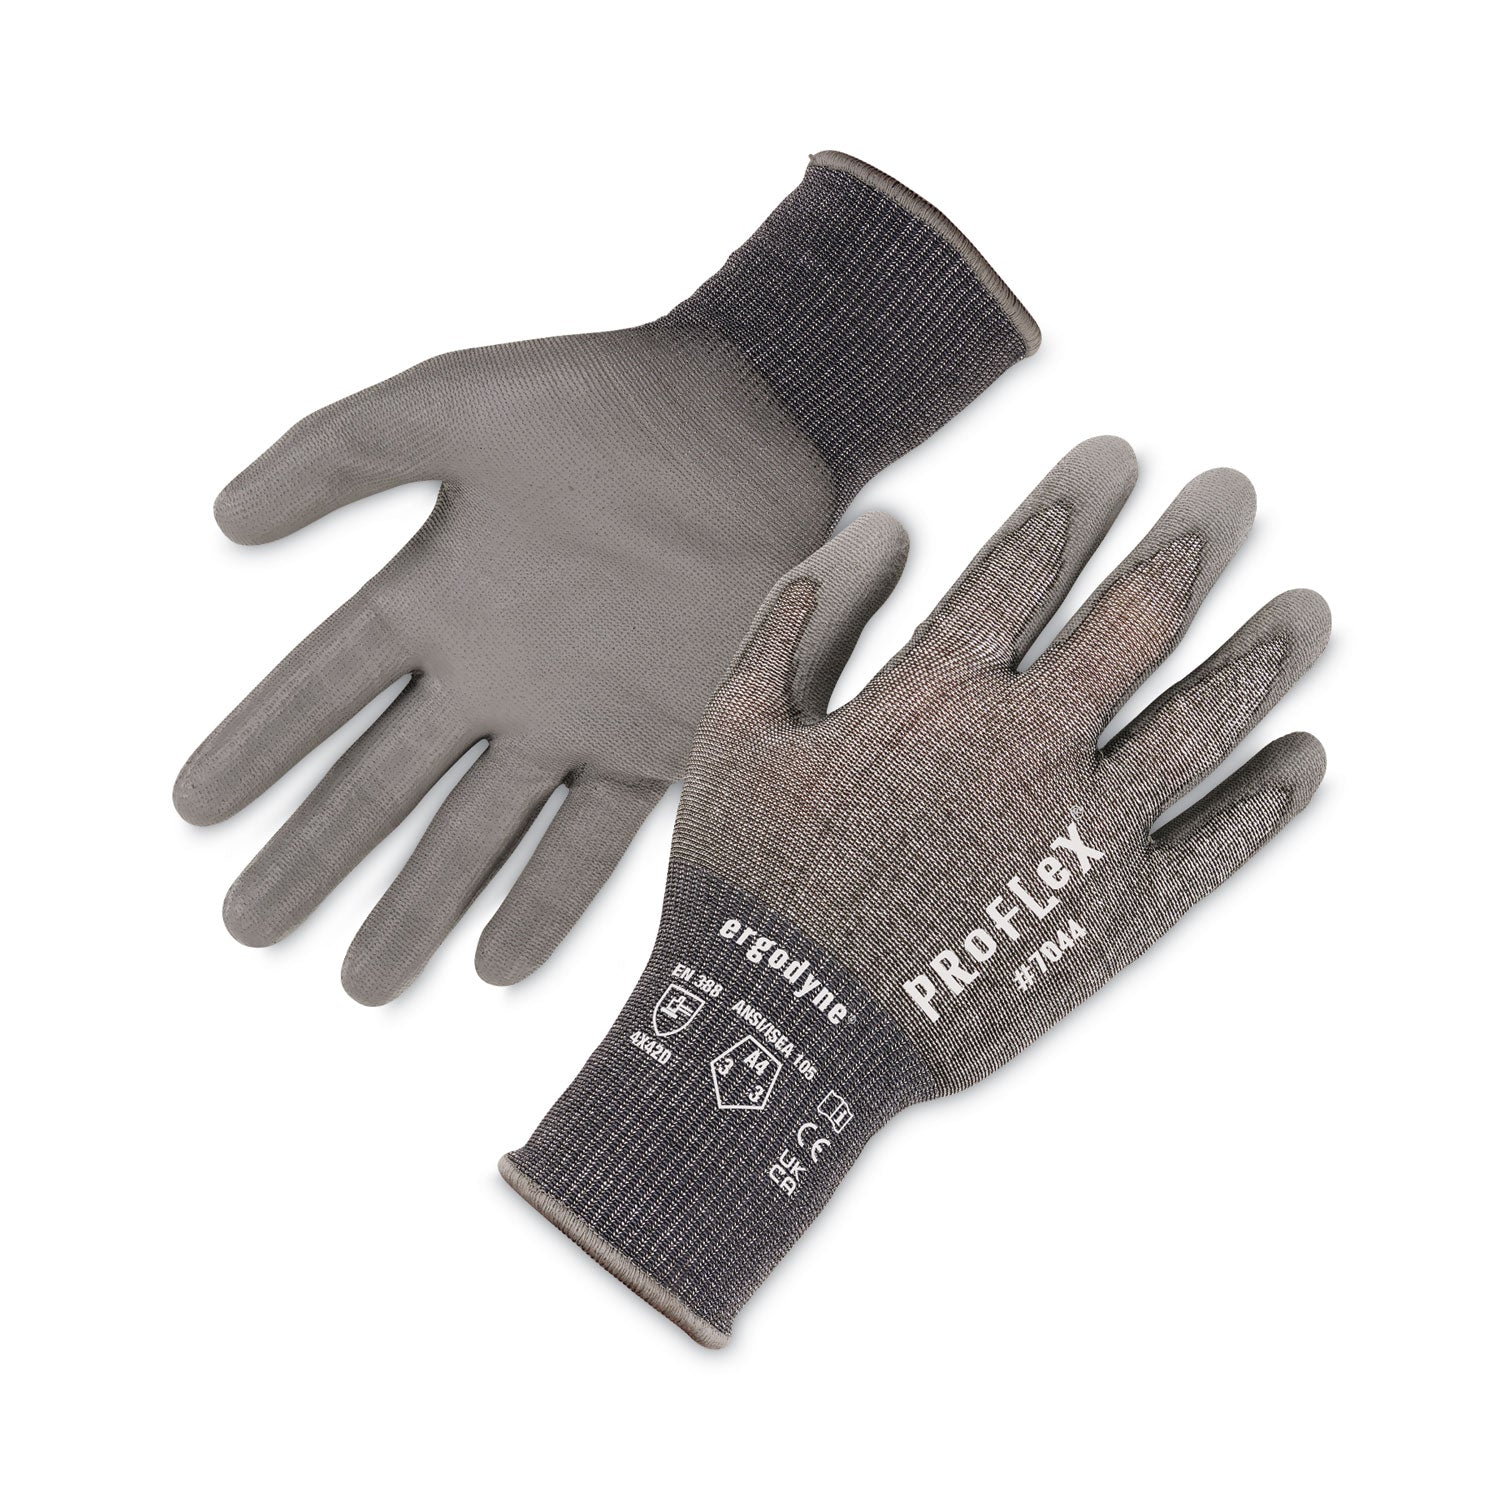 proflex-7044-ansi-a4-pu-coated-cr-gloves-gray-medium-12-pairs-pack-ships-in-1-3-business-days_ego10483 - 1